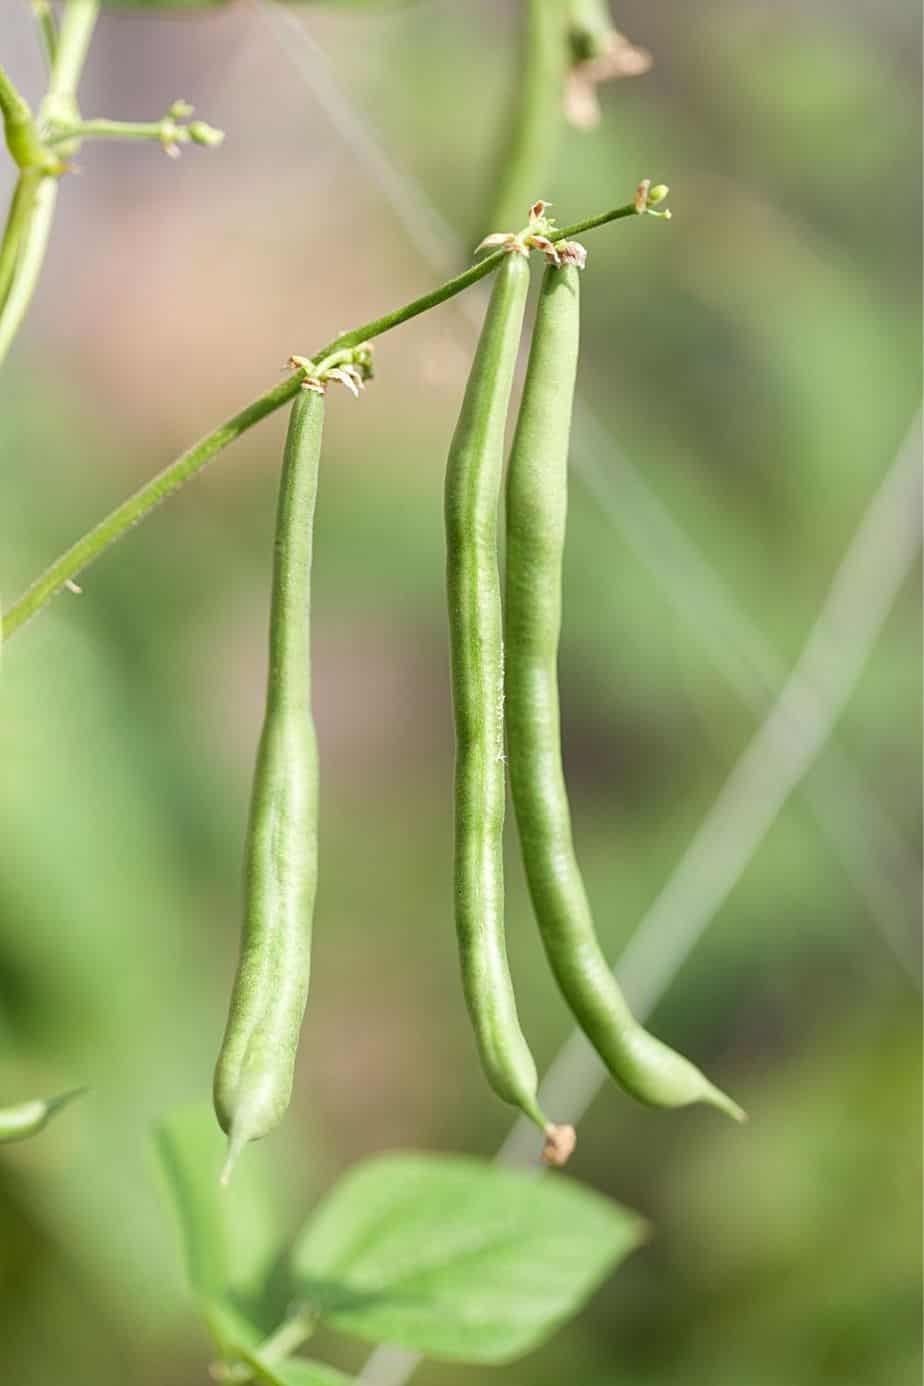 You'll need extra effort in growing Bush Beans in raised beds as you'll have to sow them every month of the year until the first frost